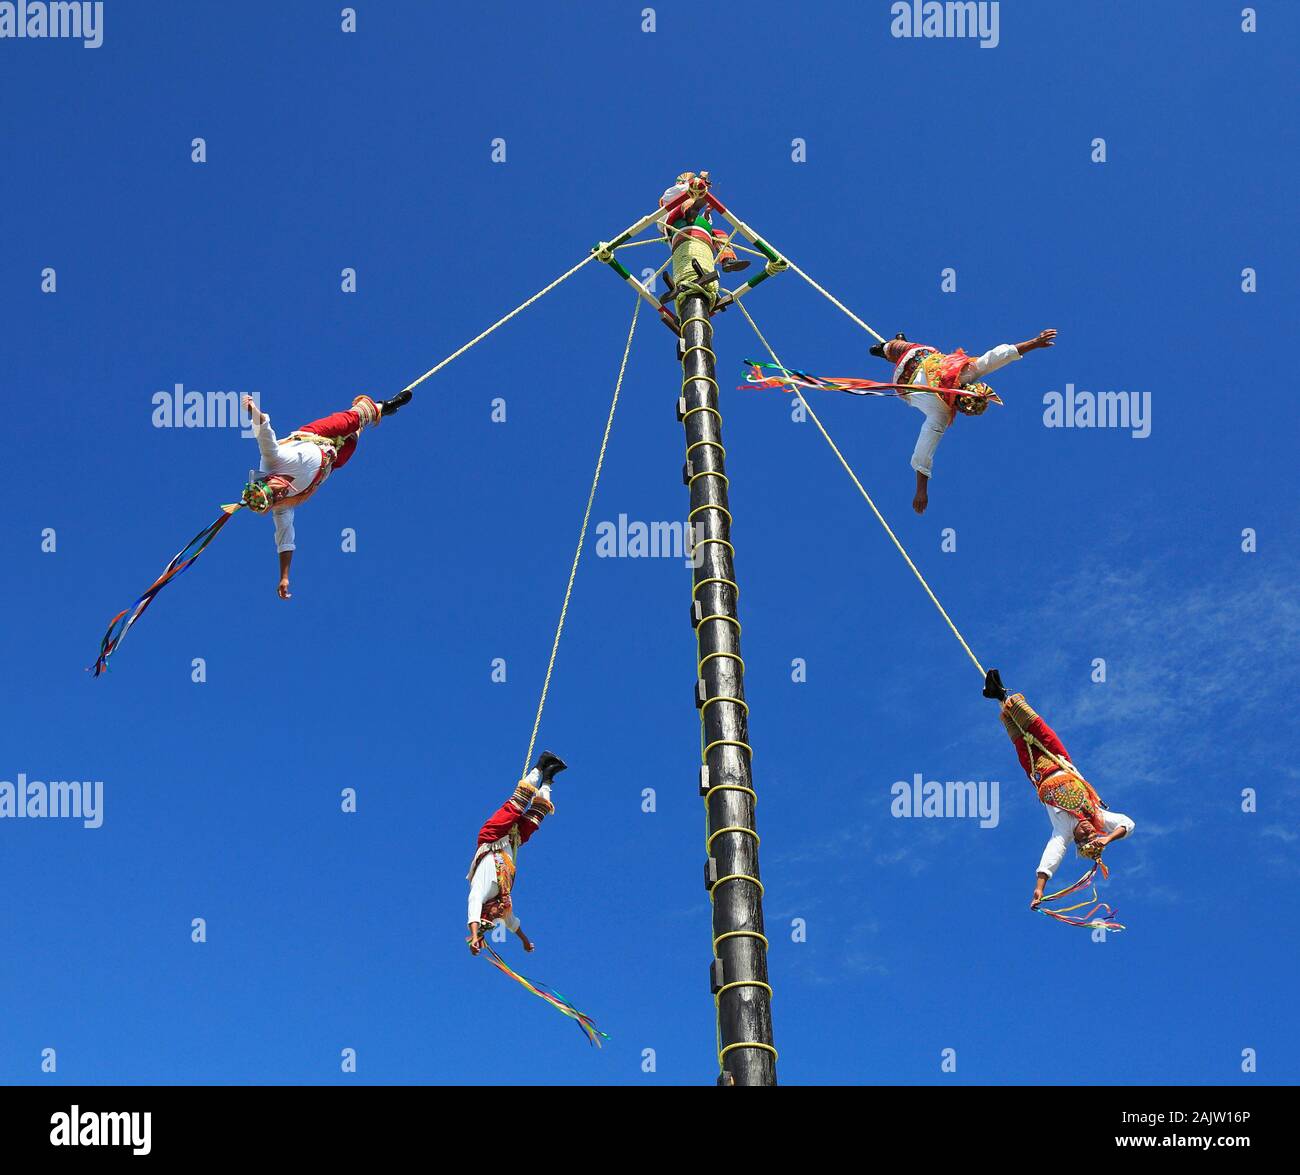 The Voladores, or flyers performance. They climb up a very high pole their waist to ropes wound around the pole and then jump off, flying gracefully. Stock Photo